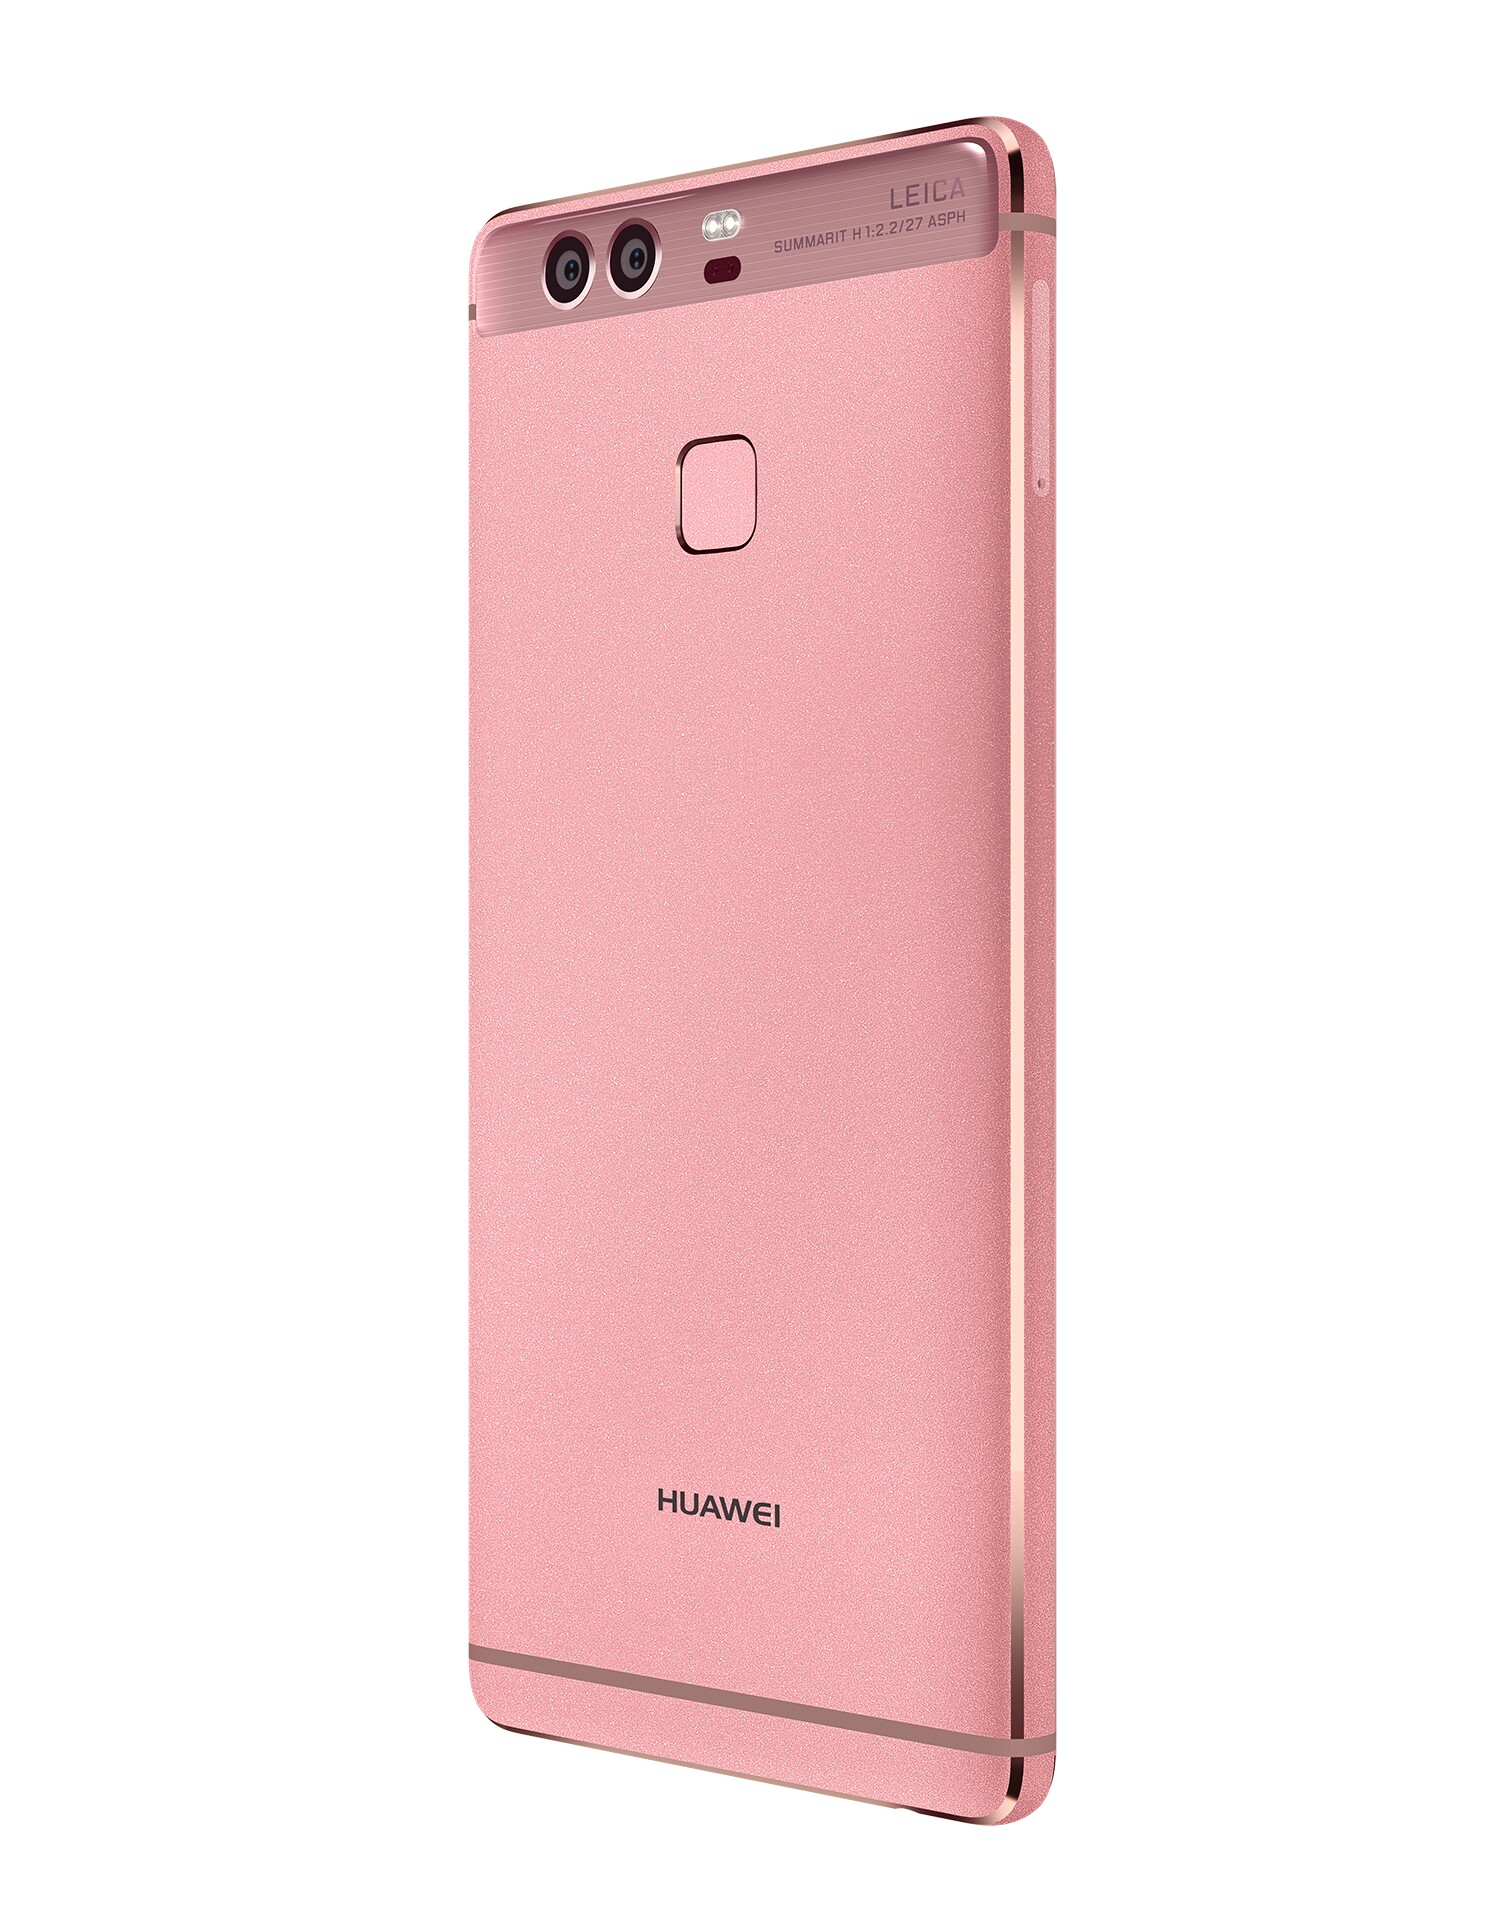 Verzamelen Inheems Geld rubber Huawei P9 & P9 Plus Officially Announced With 12MP Dual Cameras From Leica  - Gizmochina